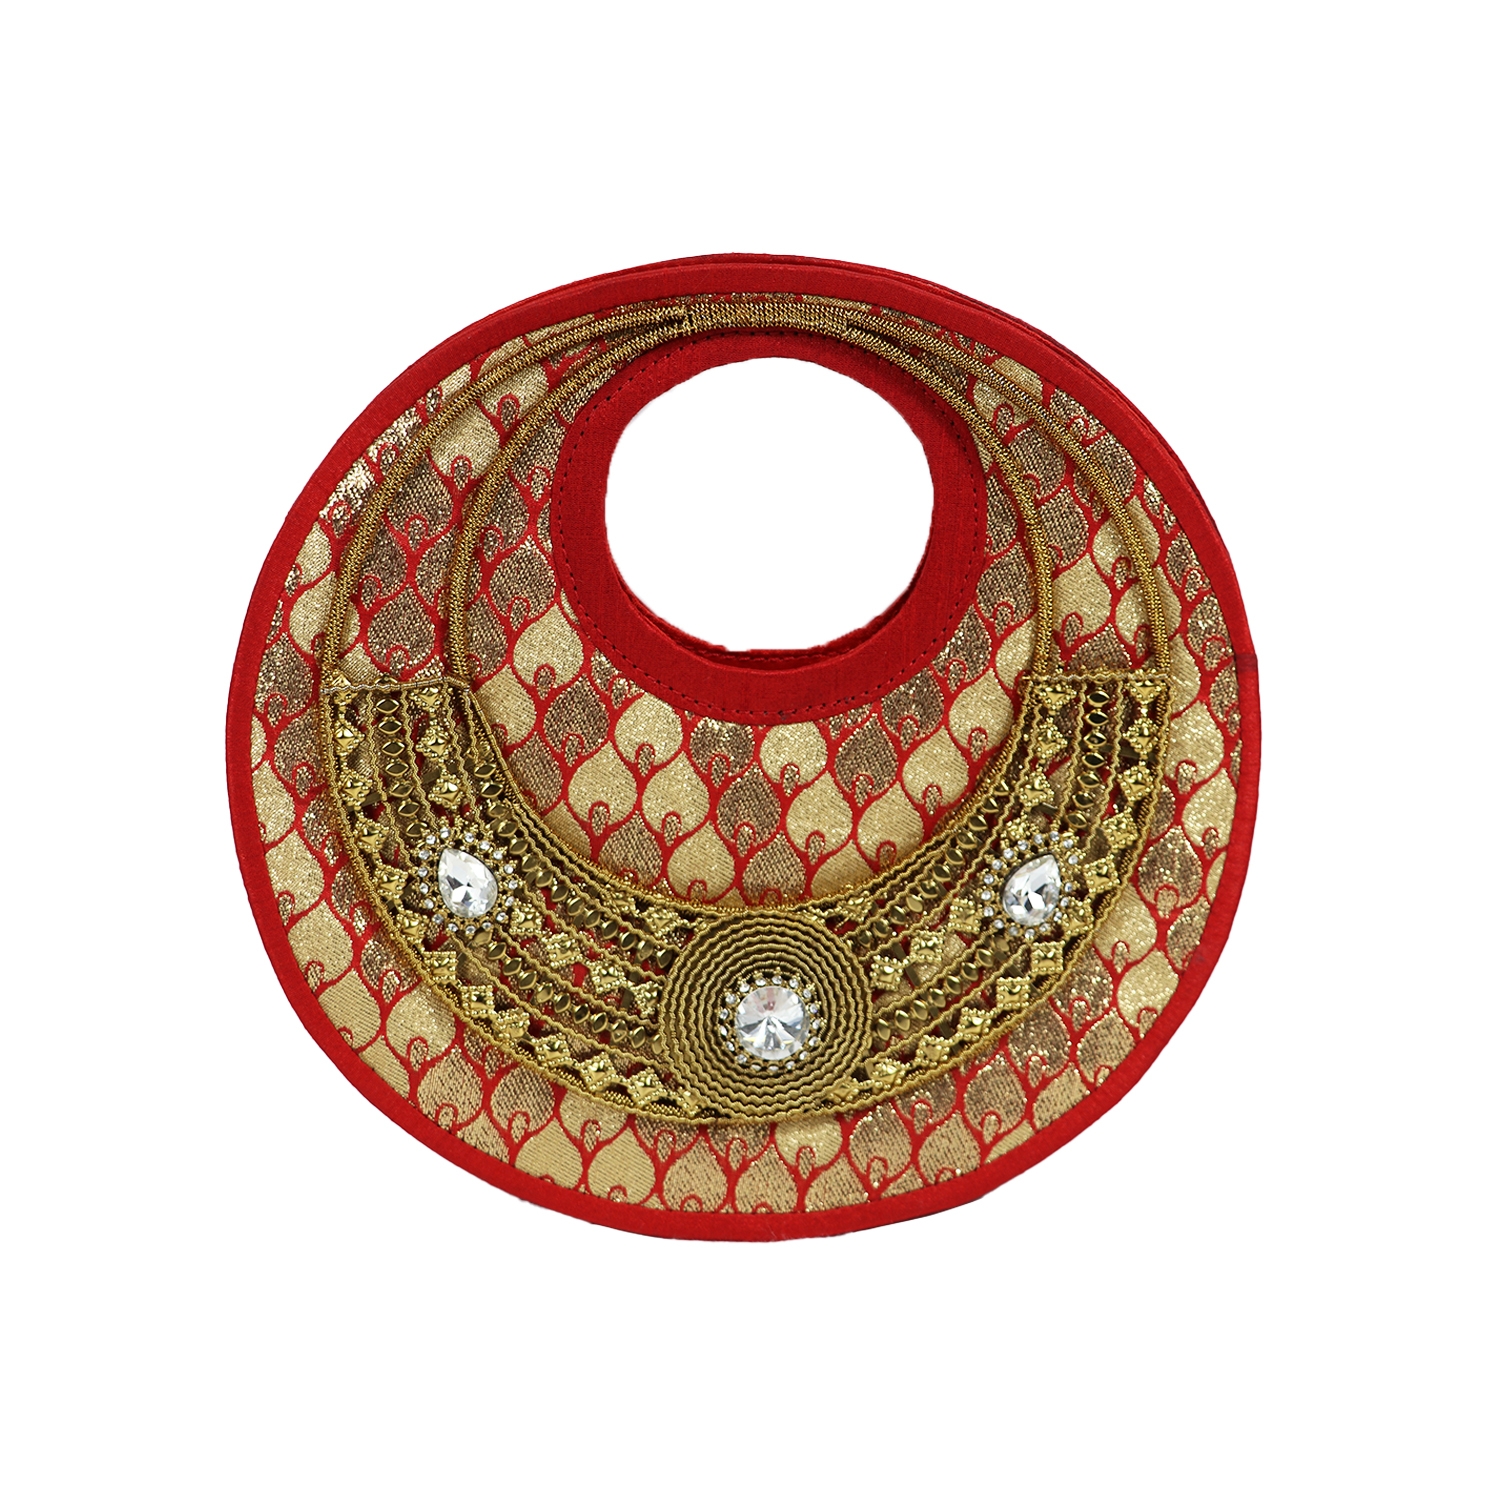 Women's Embroidered Round Party Clutch